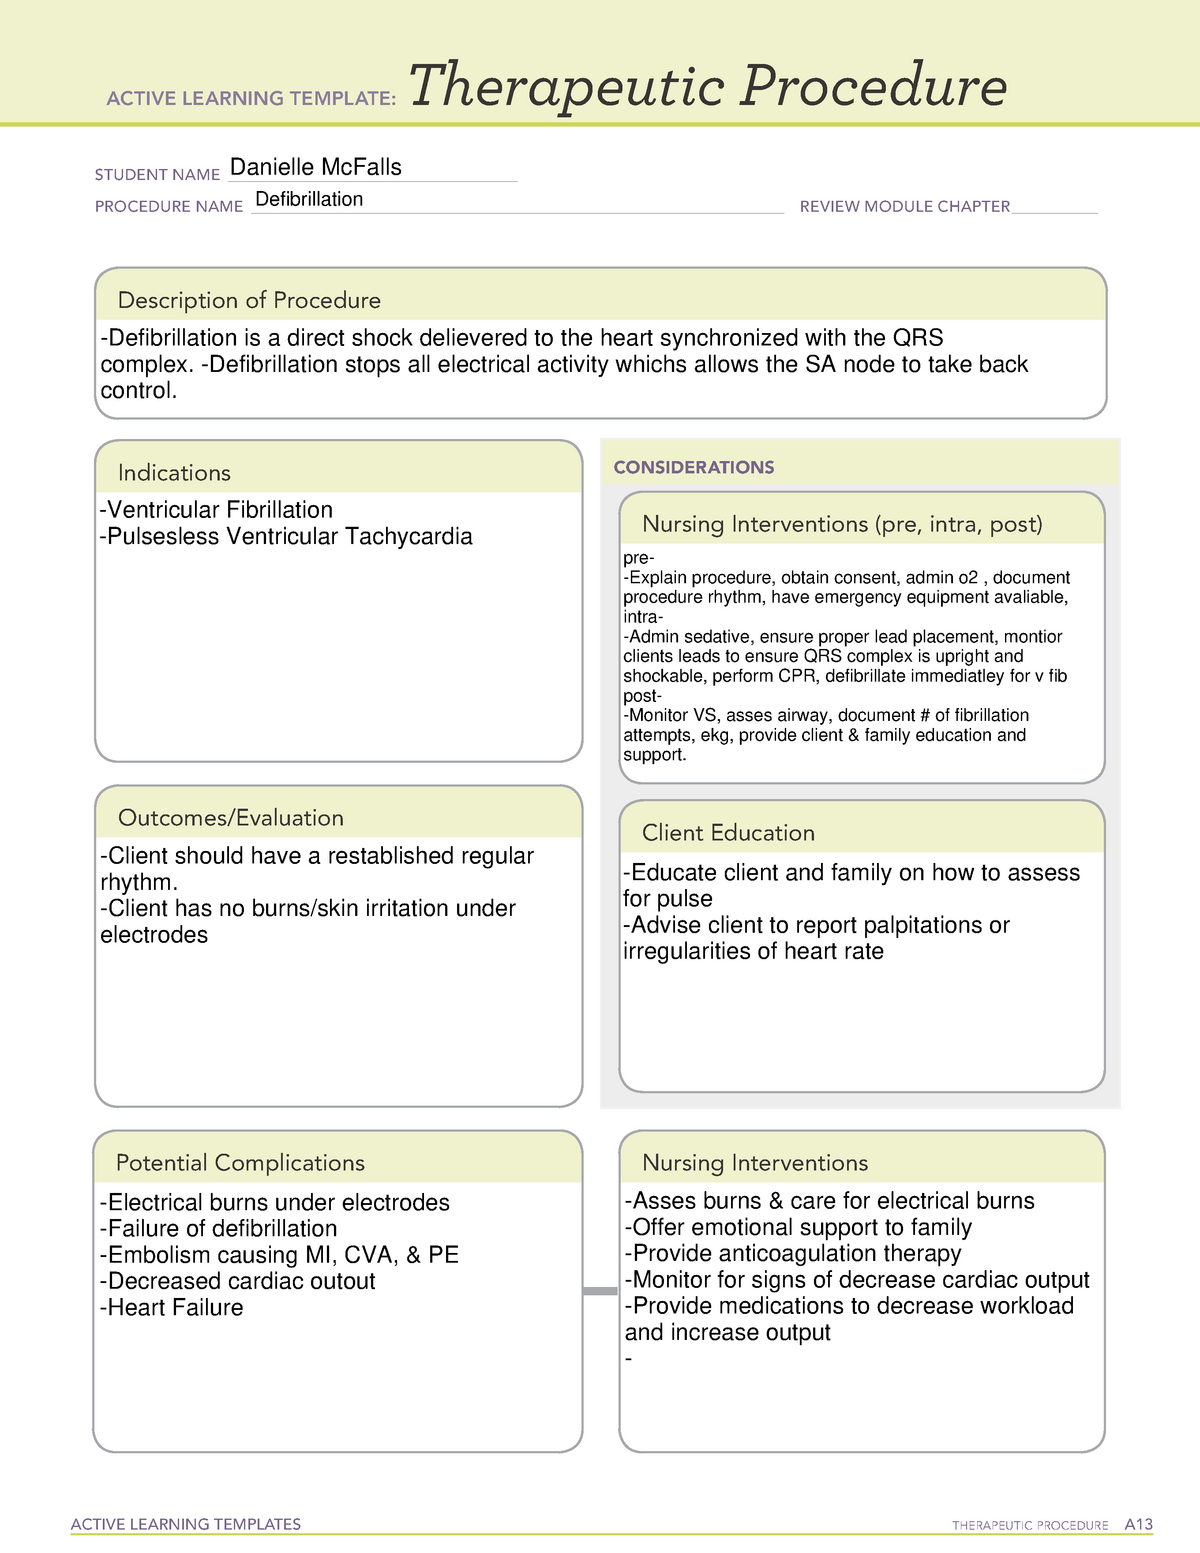 ati-defibrillation-template-active-learning-templates-therapeutic